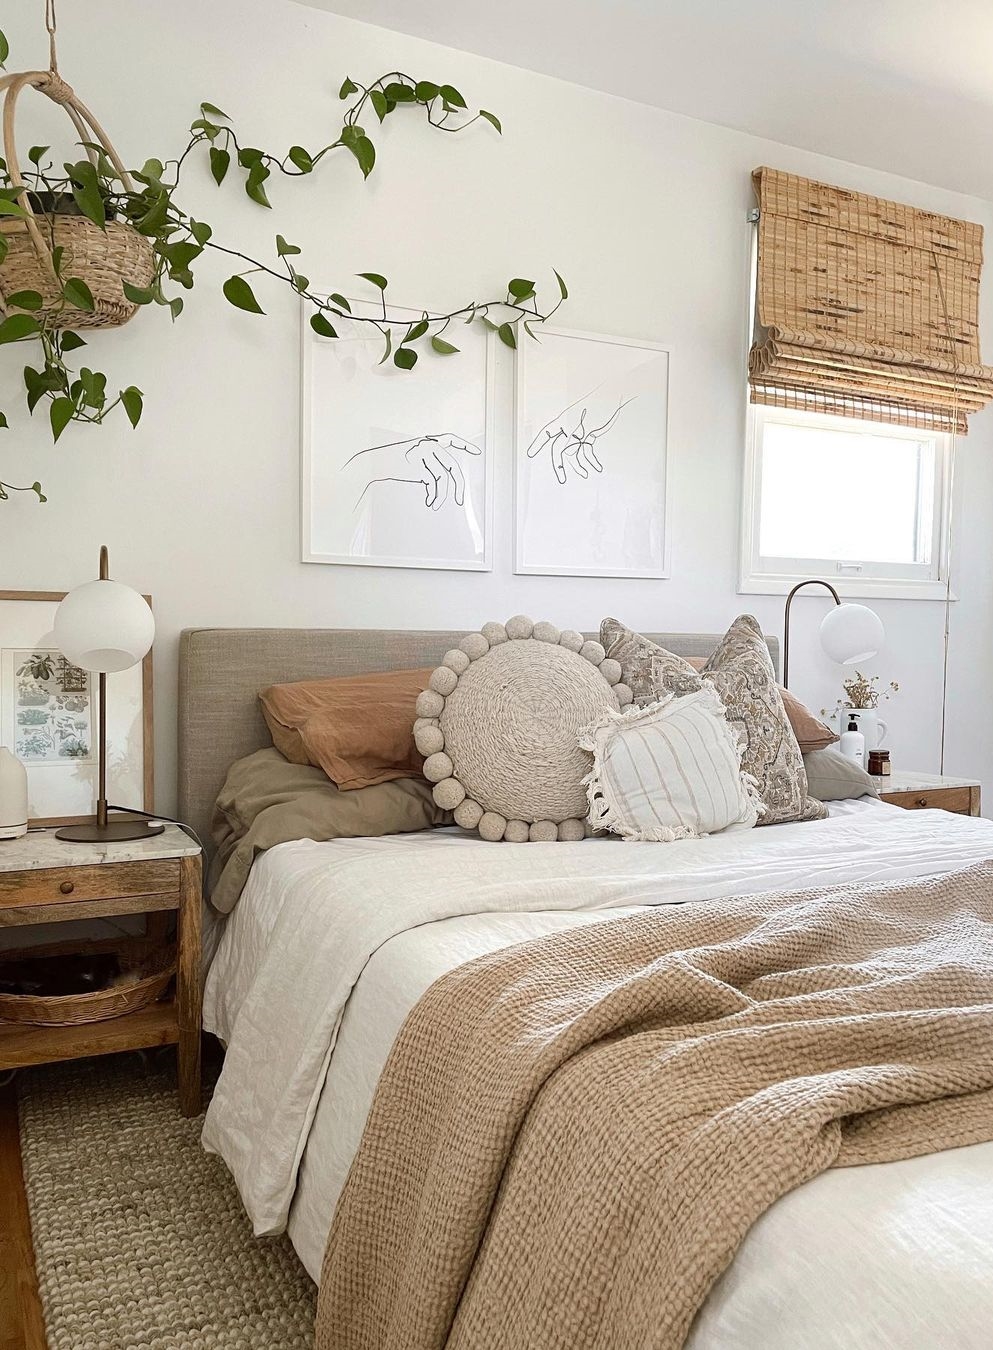 20 Decorating Ideas For A Better Bedroom in 20   Decoholic